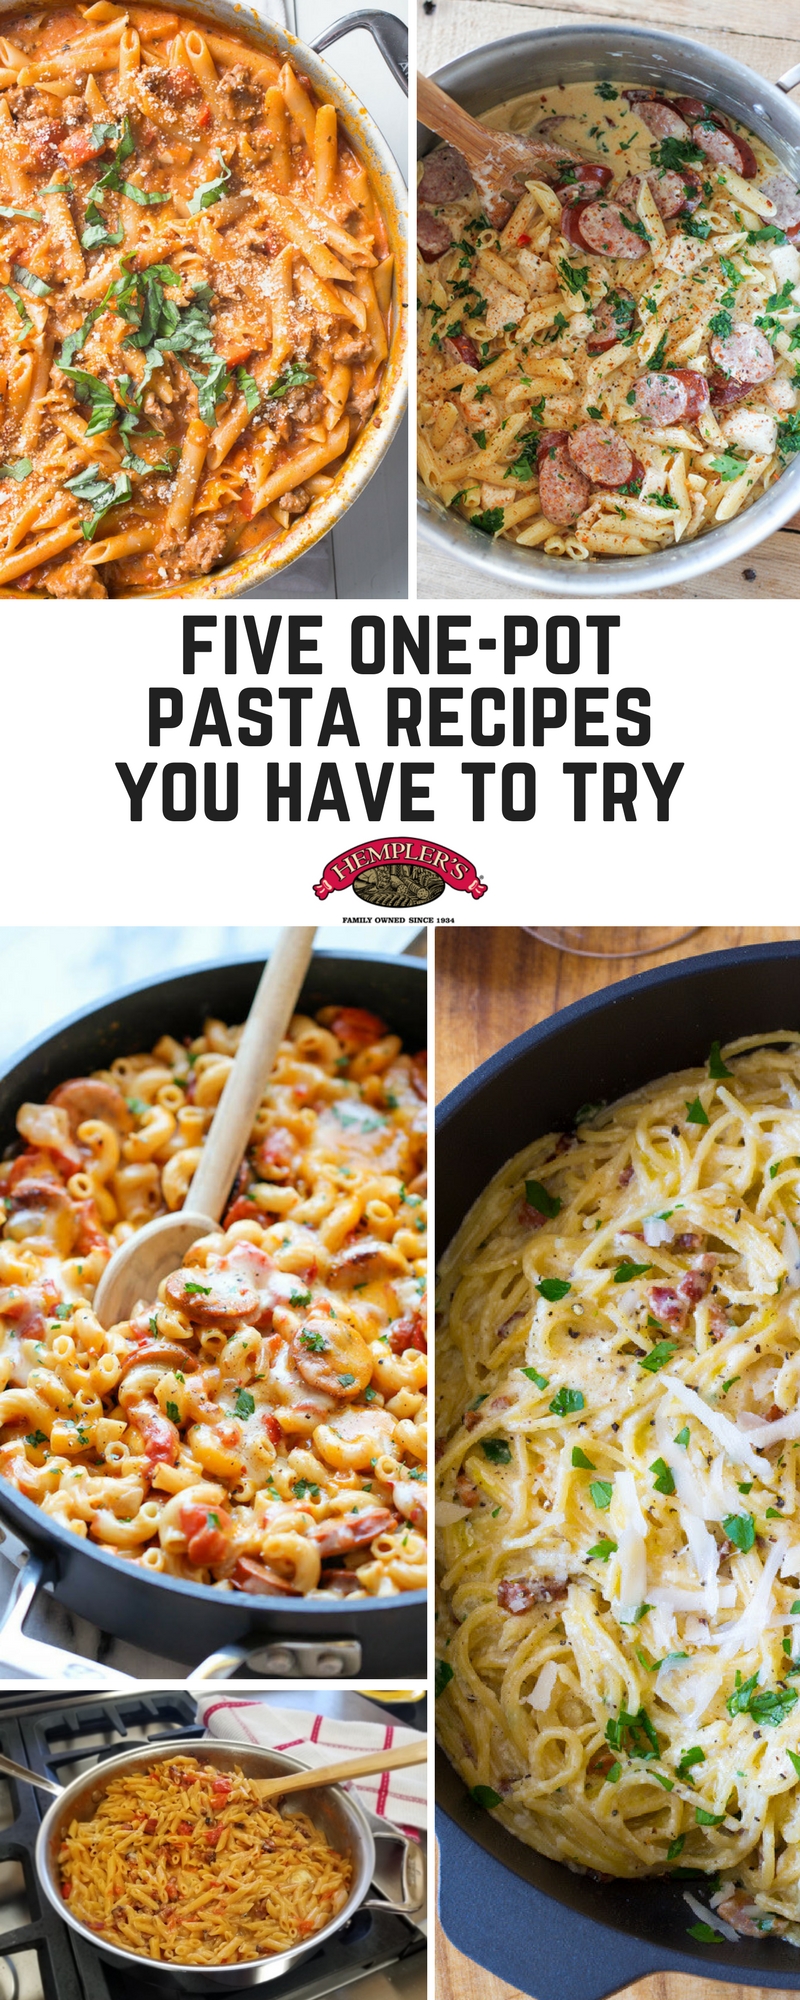 One pot pasta recipes with bacon and sausage. #onepotpasta #onepotmeal